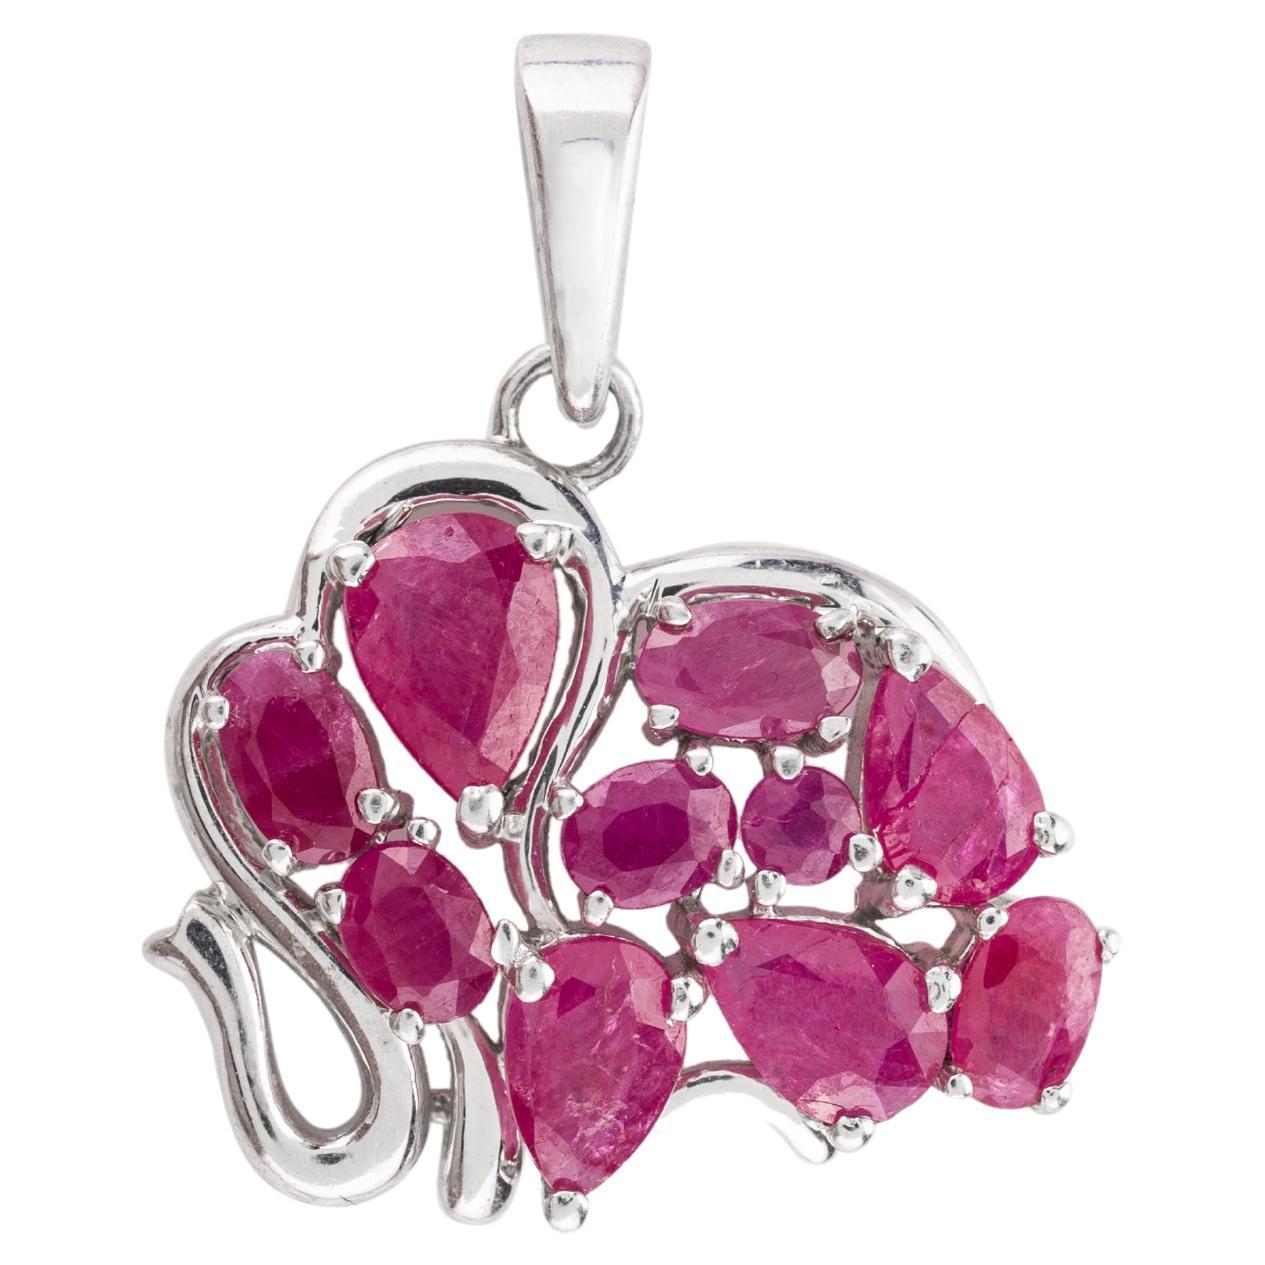 Ruby Birthstone Sterling Silver Elephant Pendant Gifts, 925 Silver Jewelry